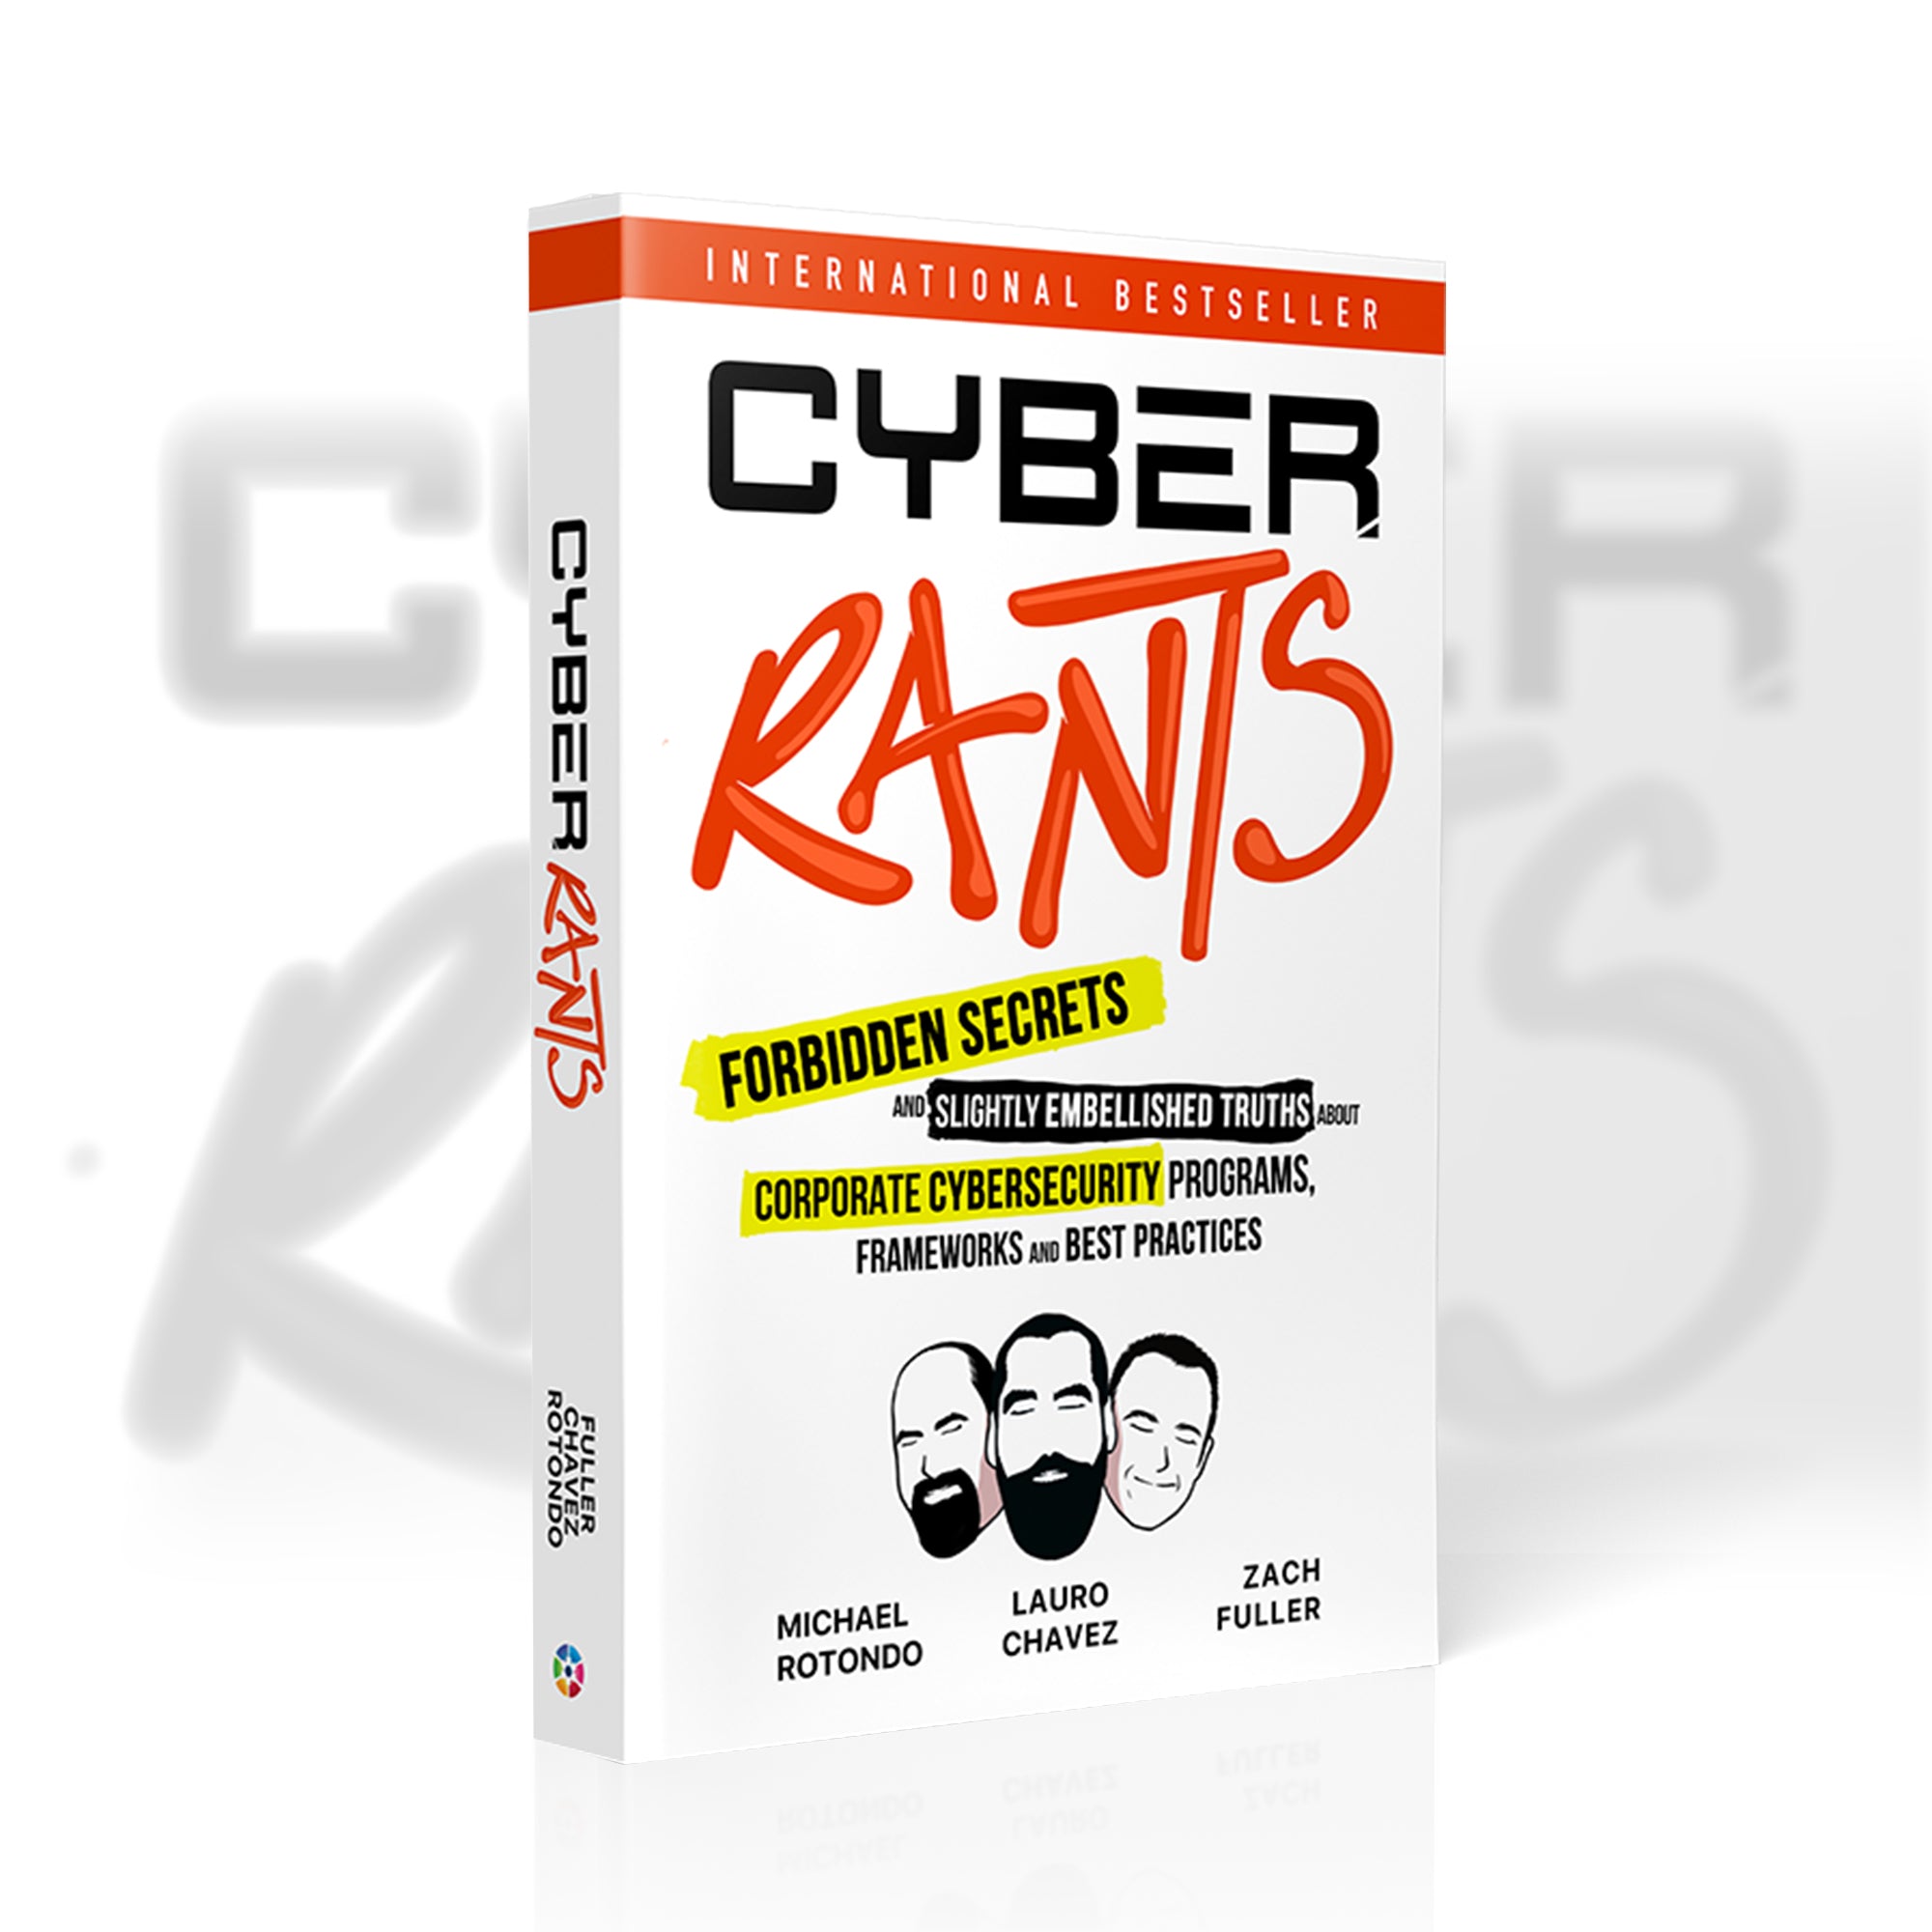 Cyber Rants: Forbidden Secrets and Slightly Embellished Truths(cont